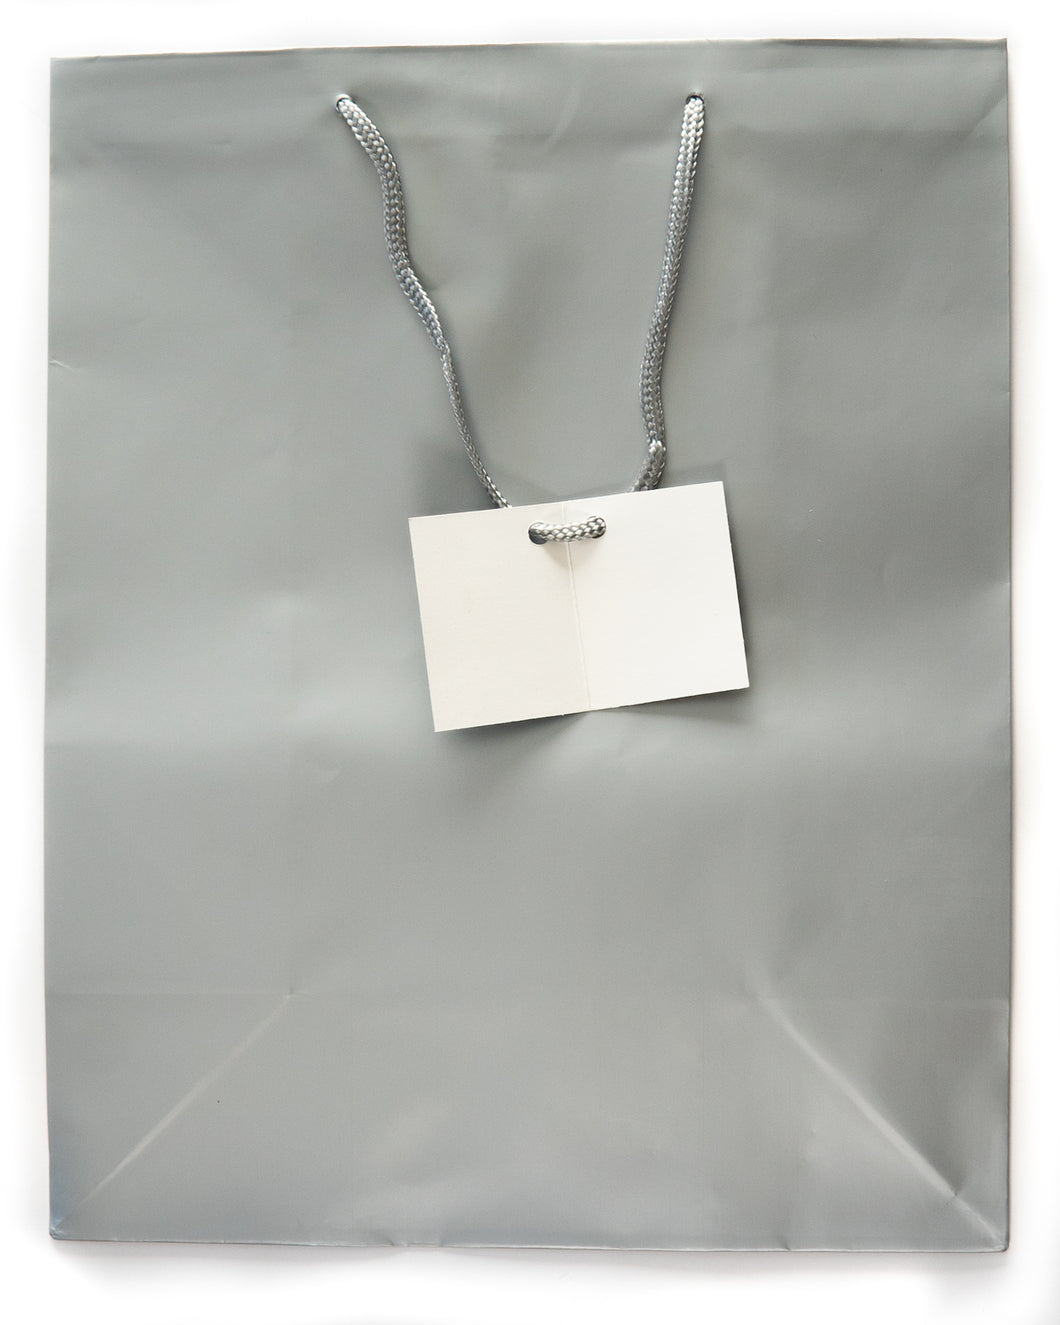 Gift Bag Silver with Cord Handle and Tag